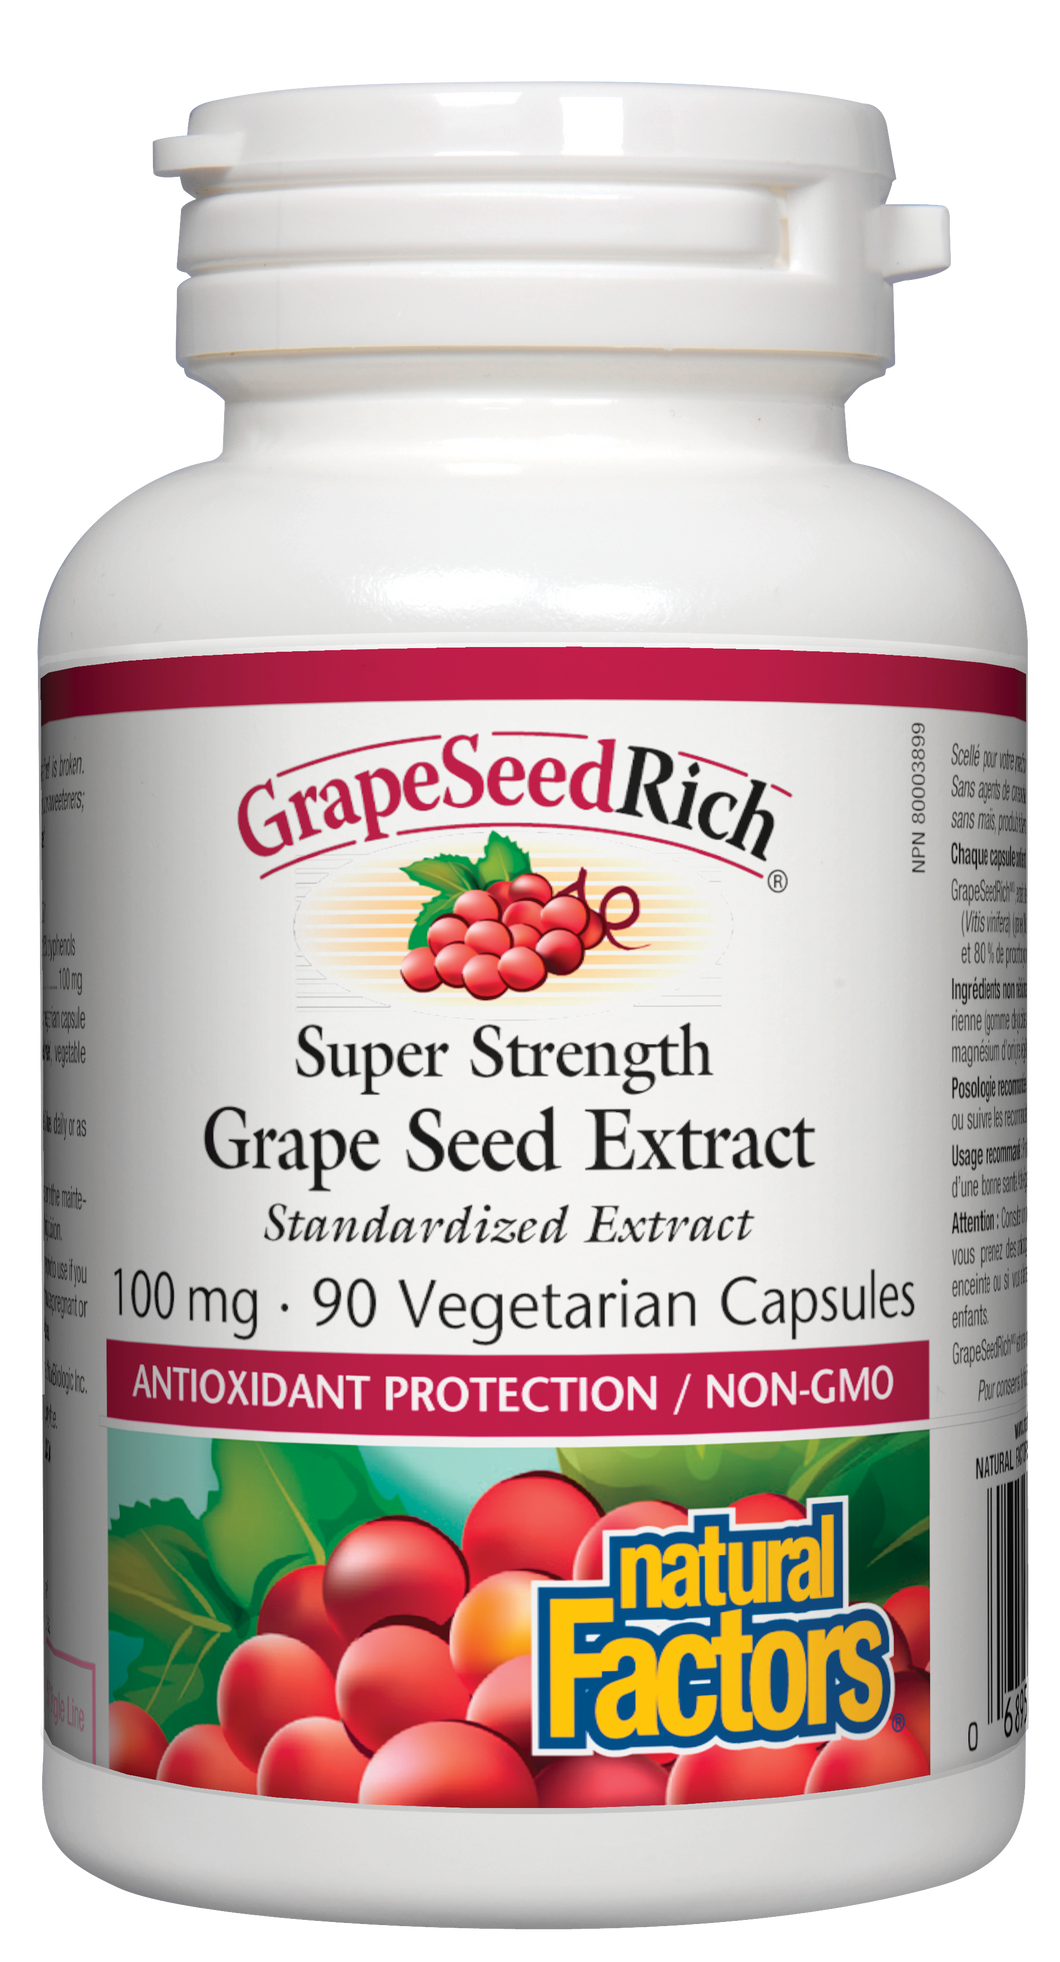 Natural Factors GrapeSeedRich is a non-GMO 100:1 standardized extract of grape seeds, guaranteed to contain a minimum of 95% polyphenols and 80% proanthocyanidins. It is a rich source of antioxidants that help the body fight free radical damage and inflammation, help strengthen blood vessels, and support night vision.